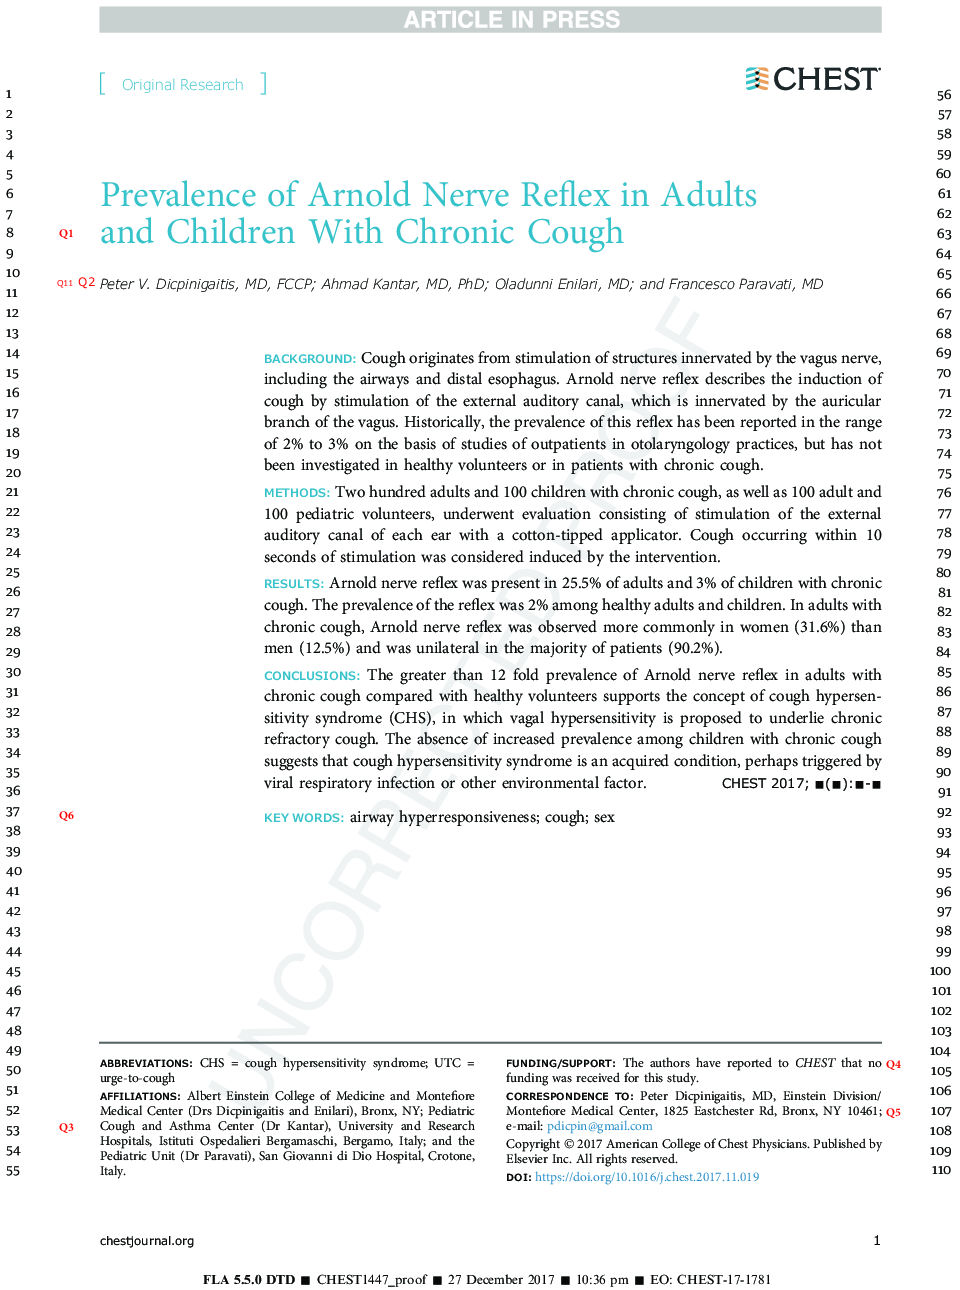 Prevalence of Arnold Nerve Reflex in Adults and Children With Chronic Cough